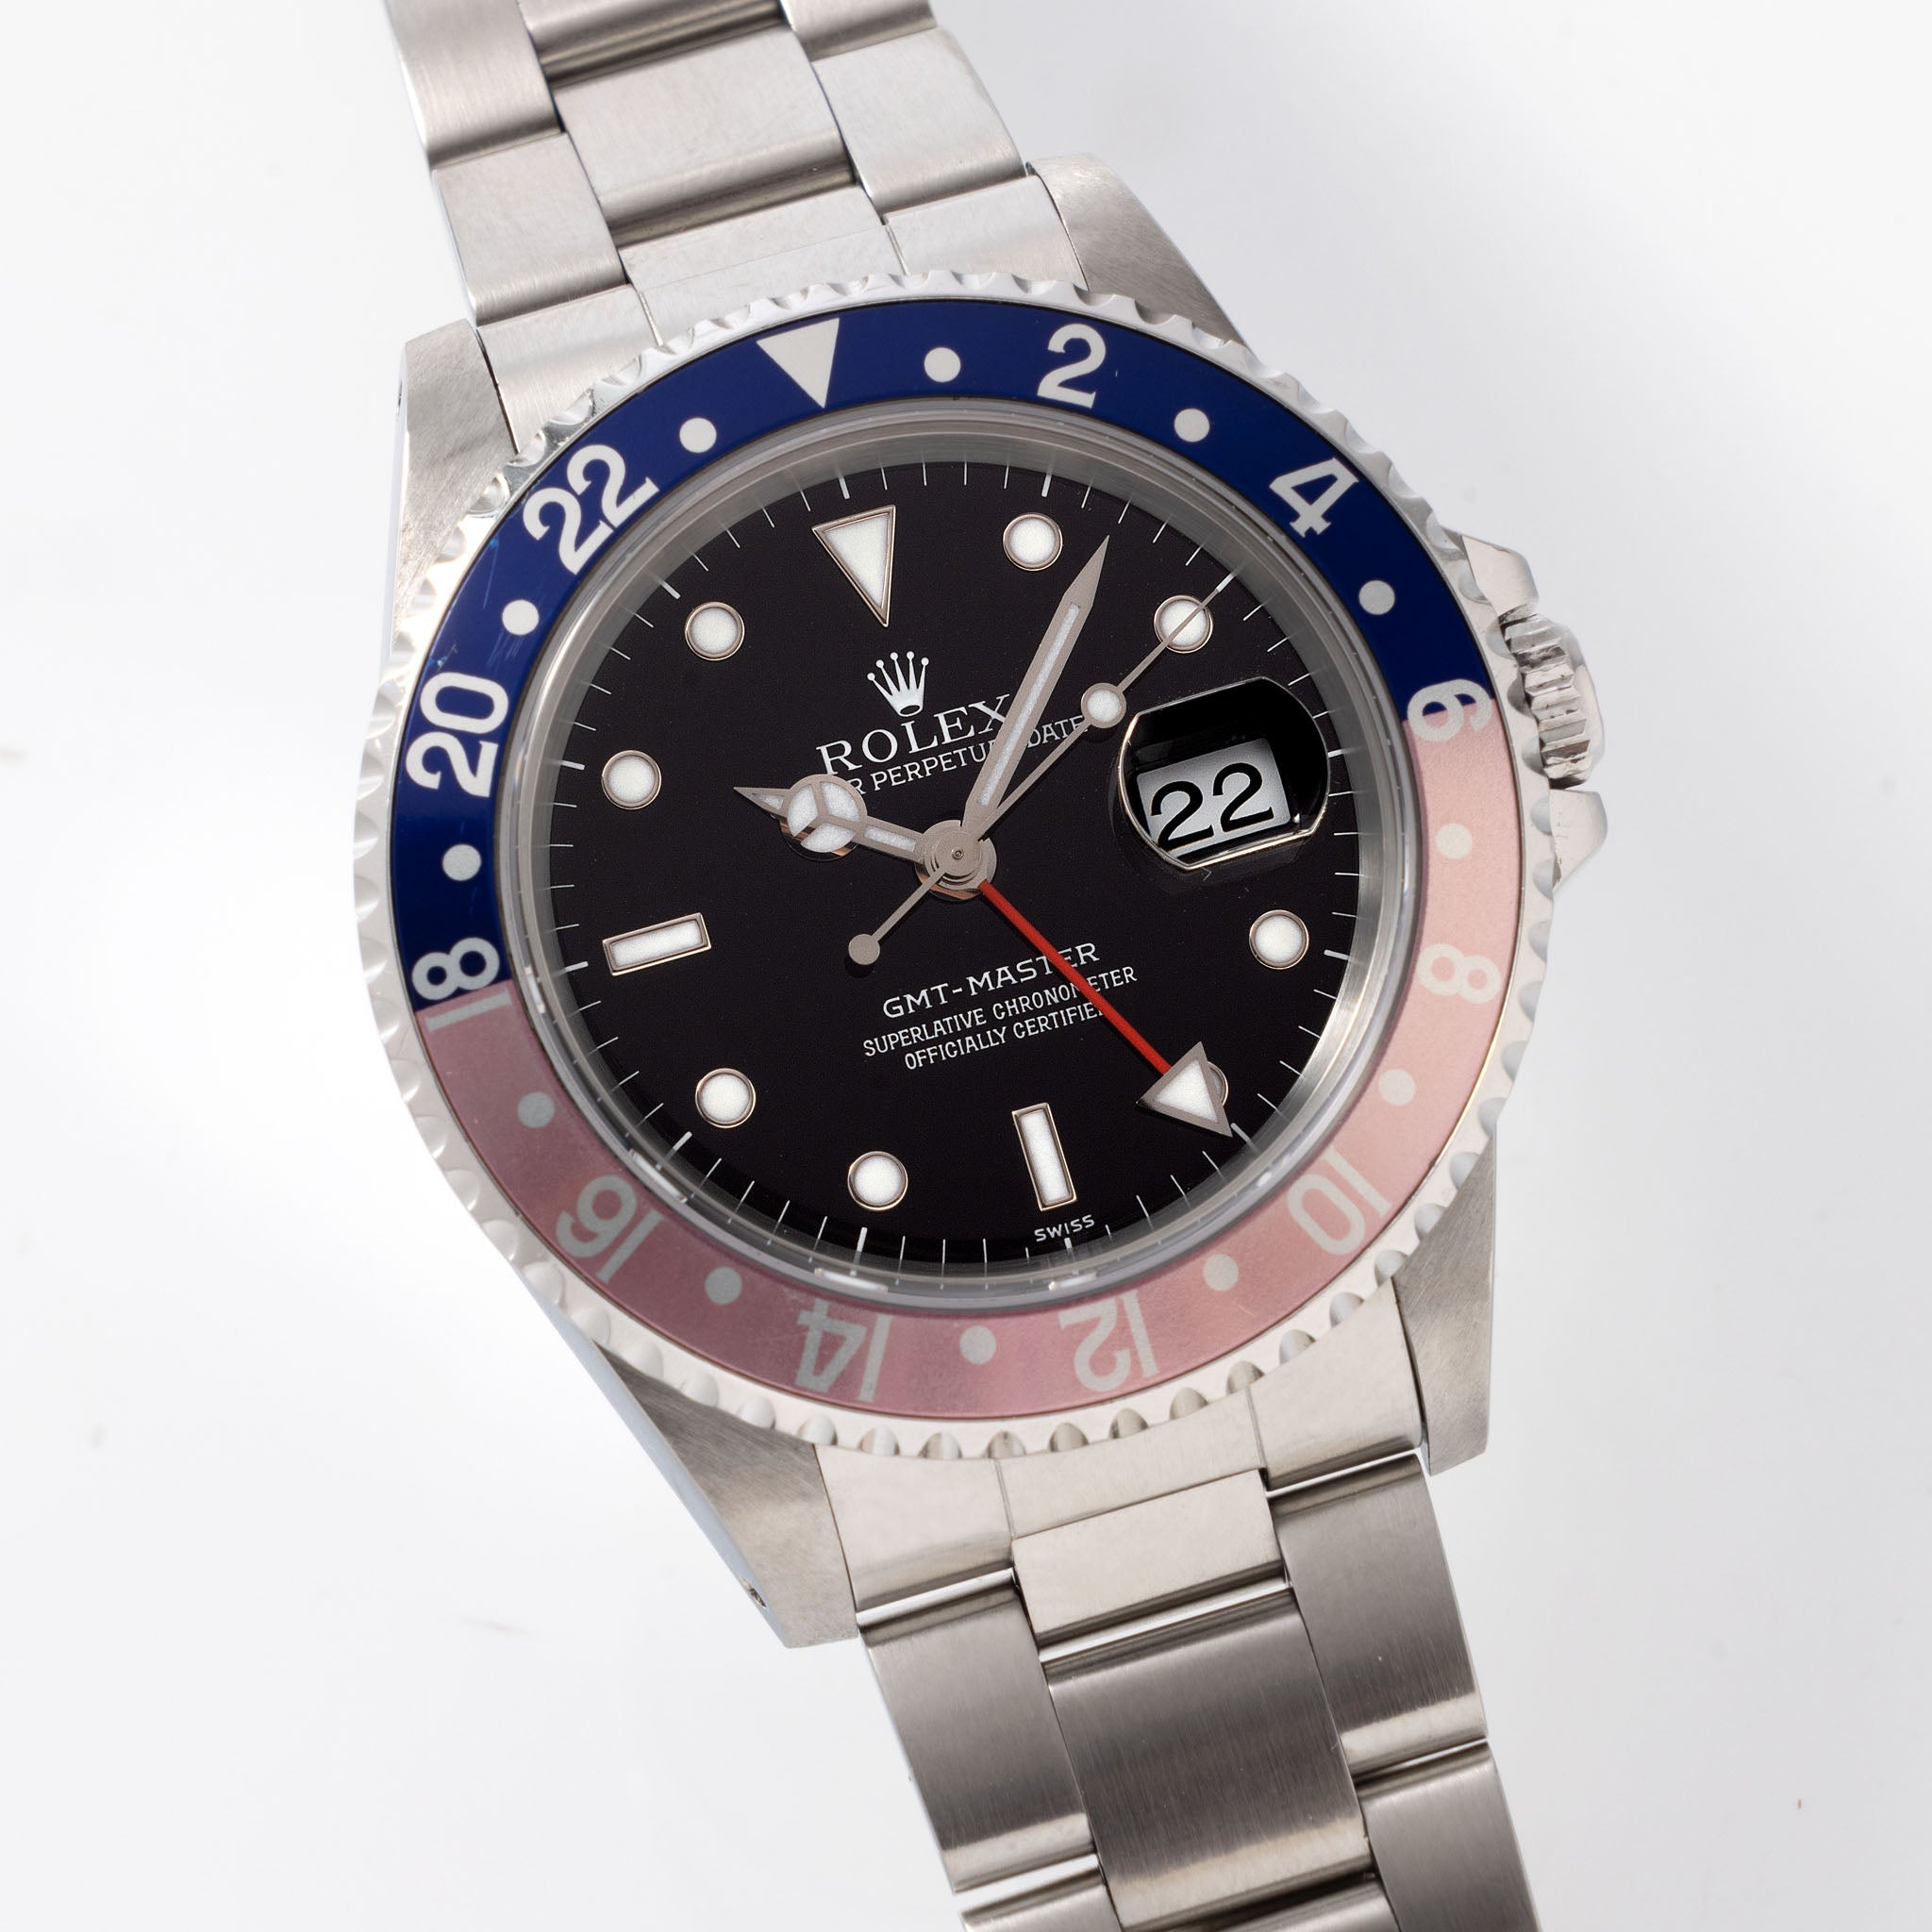 Rolex Gmt-master Swiss only dial ref 16700 Box and papers set faded Pepsi